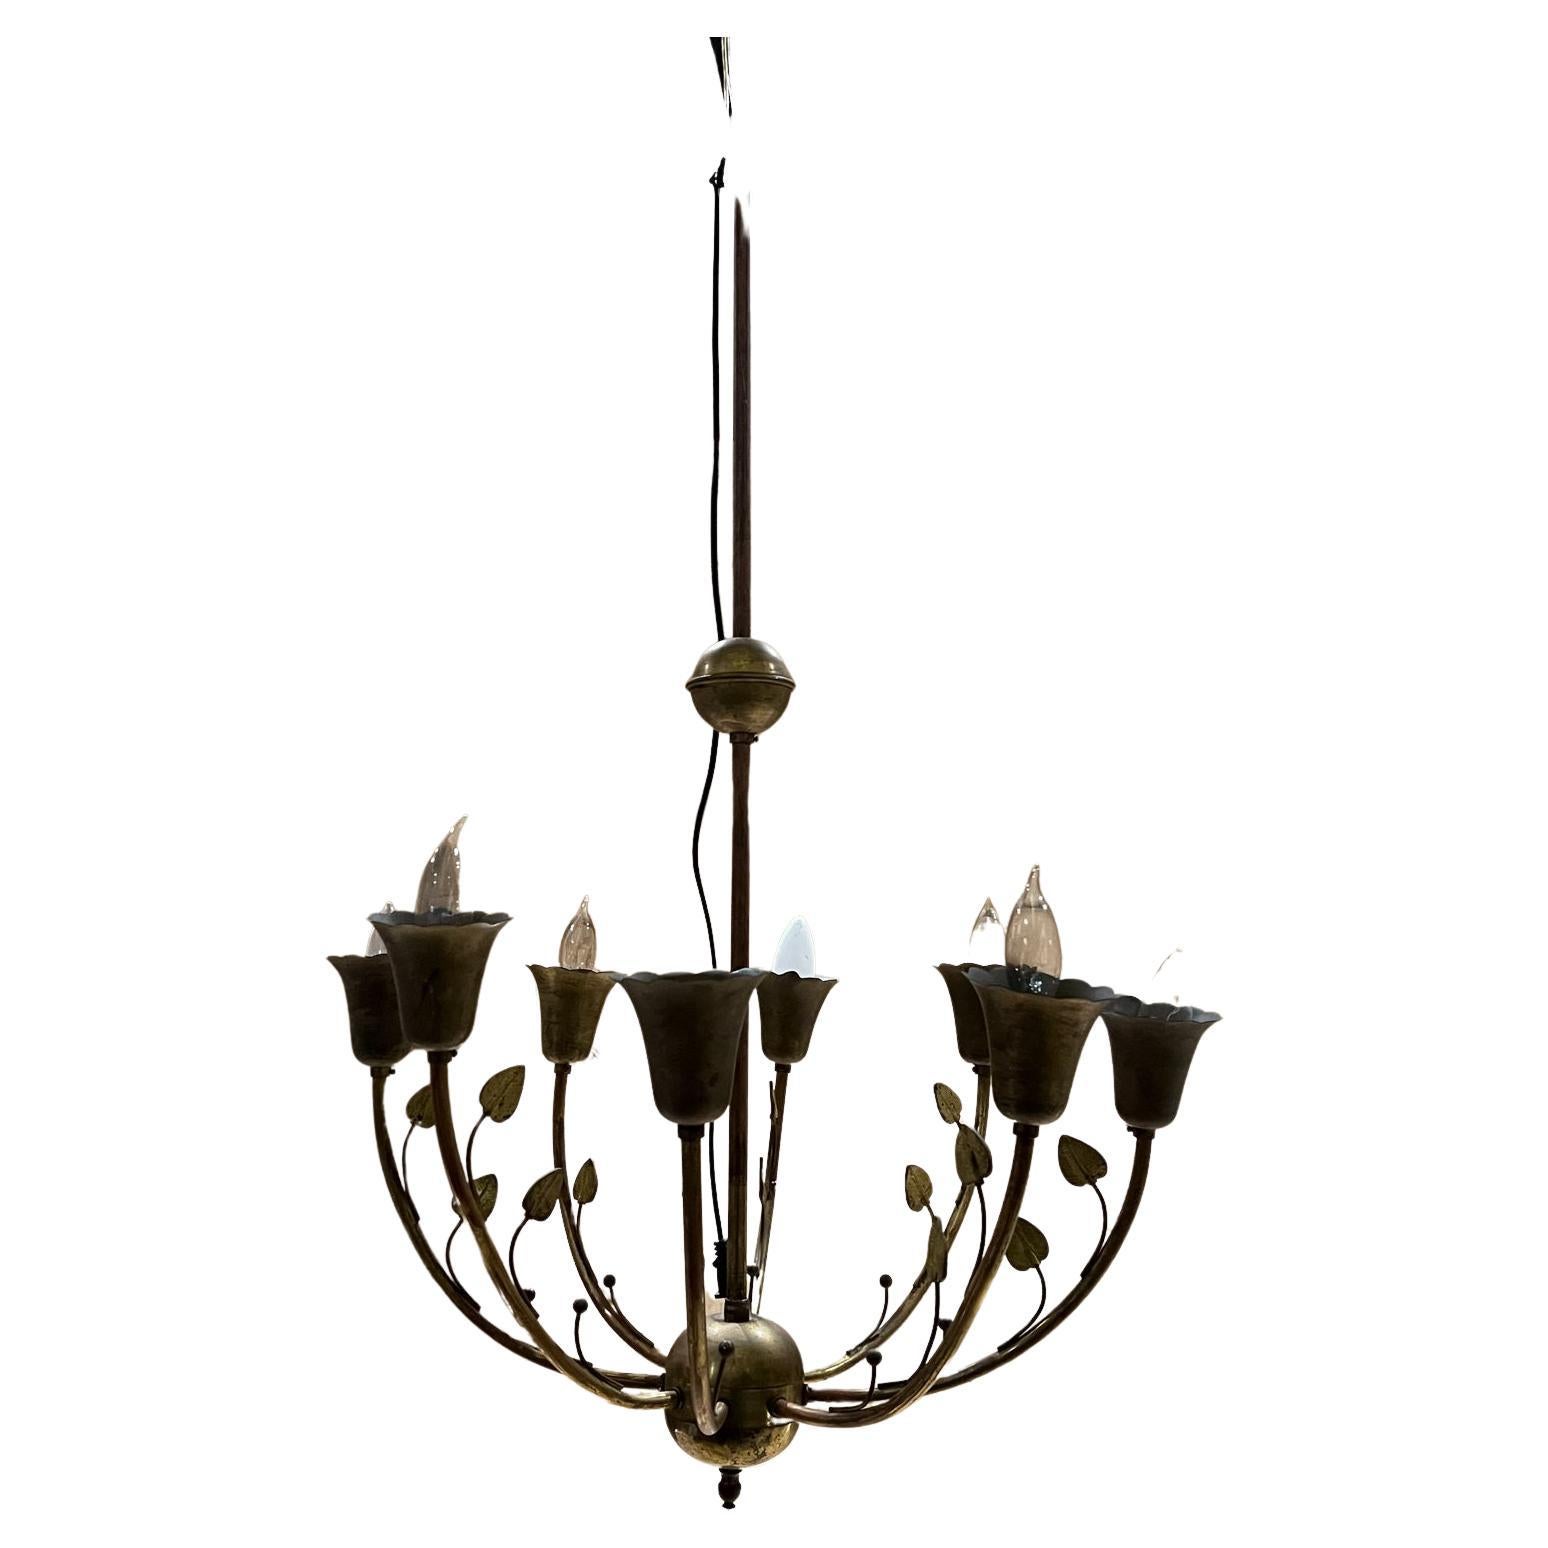 1950s Patinated Old Italian Brass Chandelier Eight Arm Lamp Style of Stilnovo For Sale